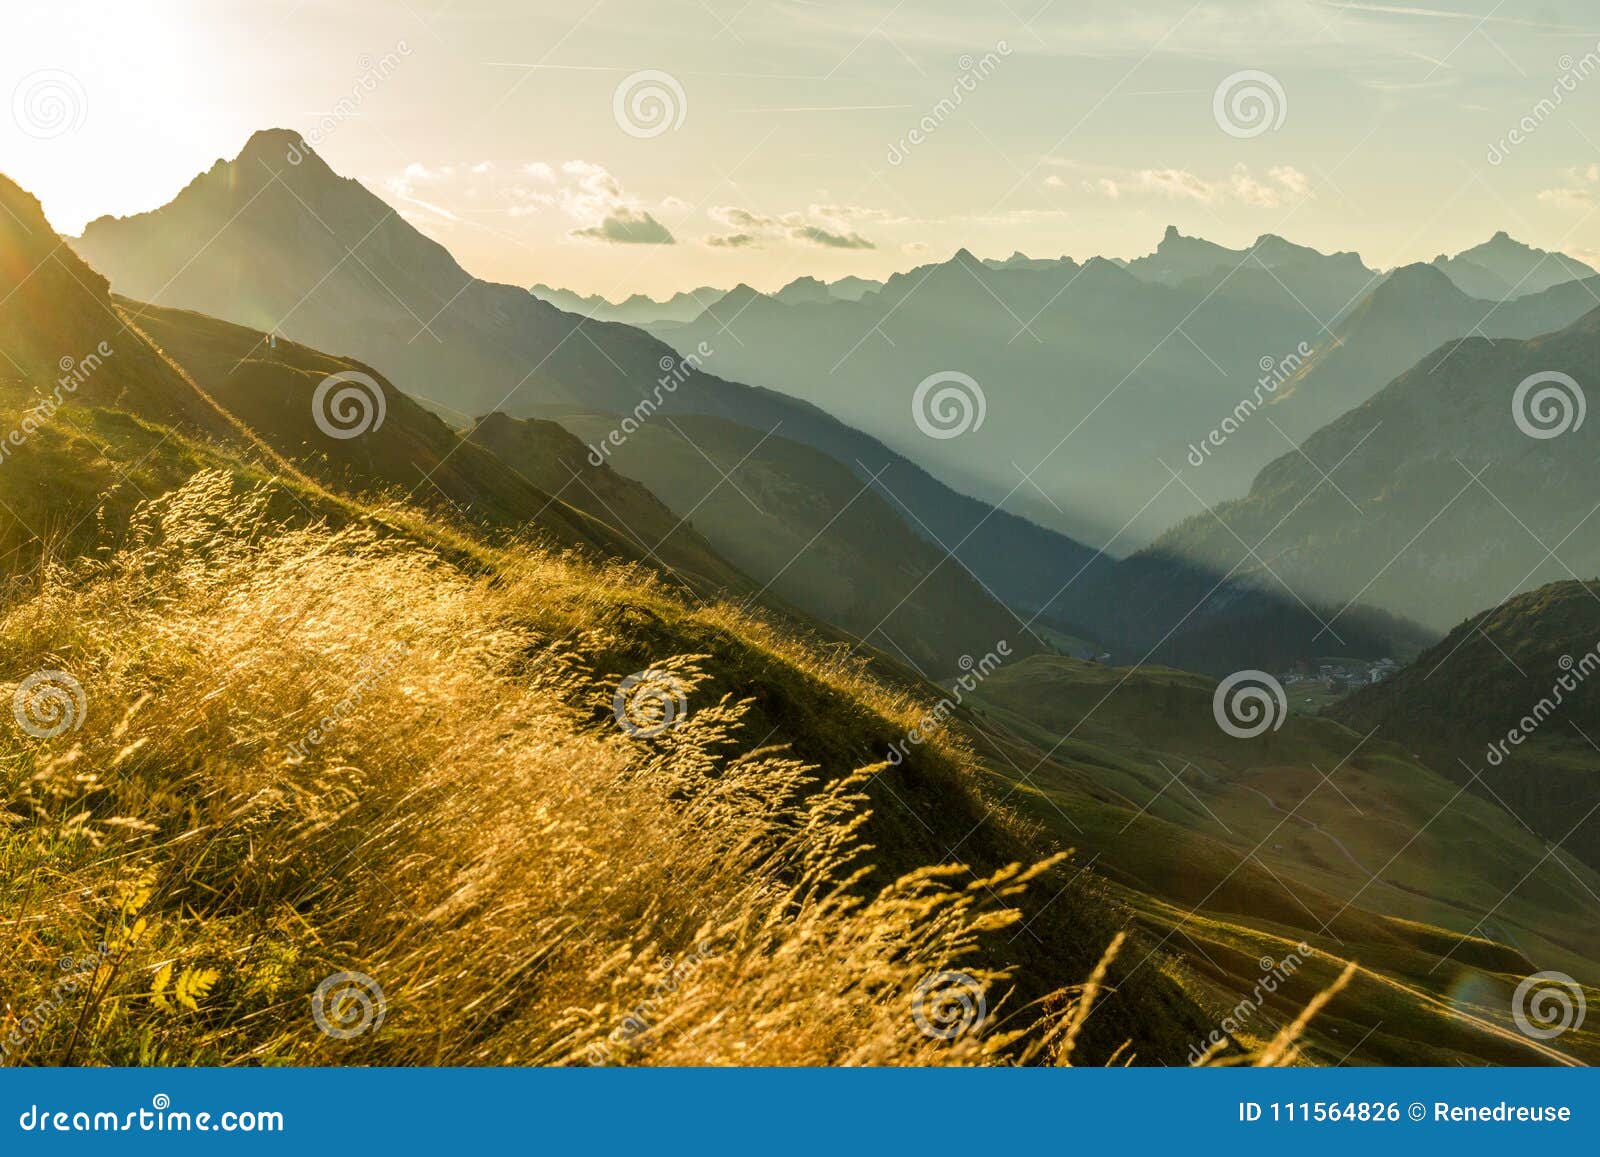 beautiful sunrise and layered mountain silhouettes in early morning. lechtal and allgau alps, bavaria and austria.